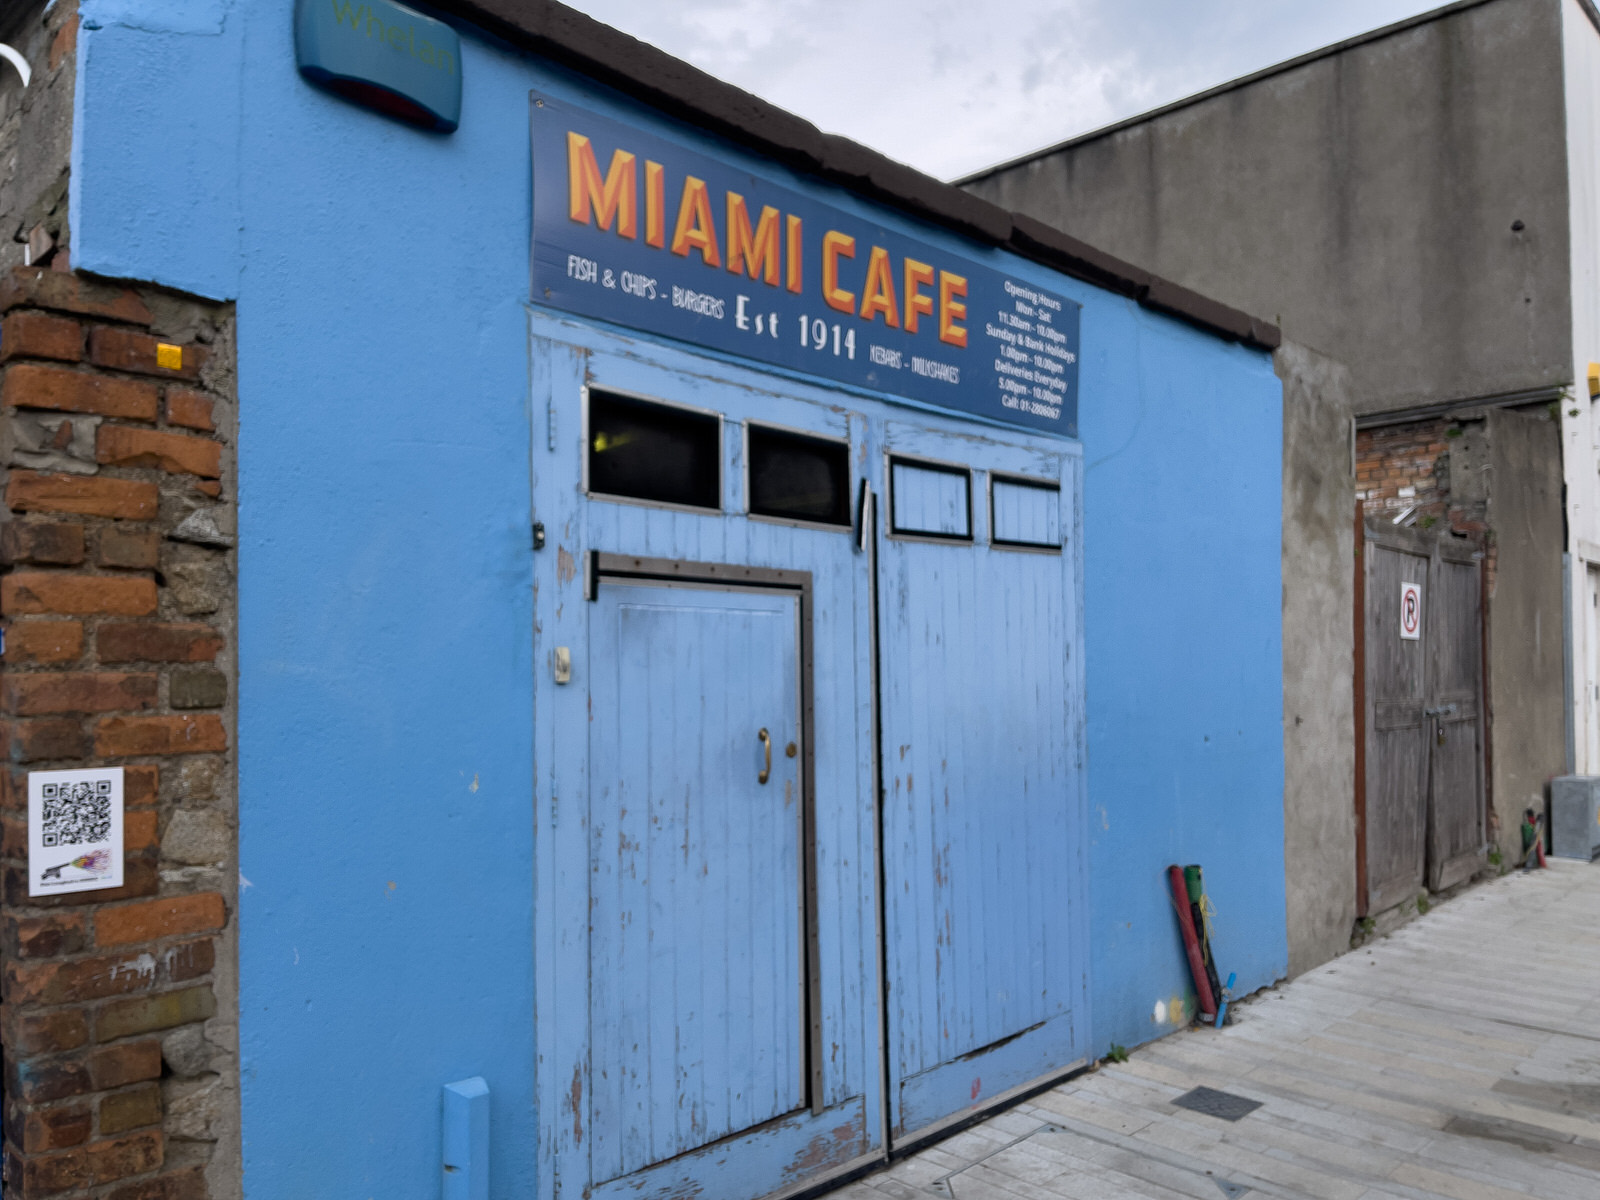 THE MIAMI CAFE [CLAIMS TO BE IN BUSINESS SINCE 1914] 003